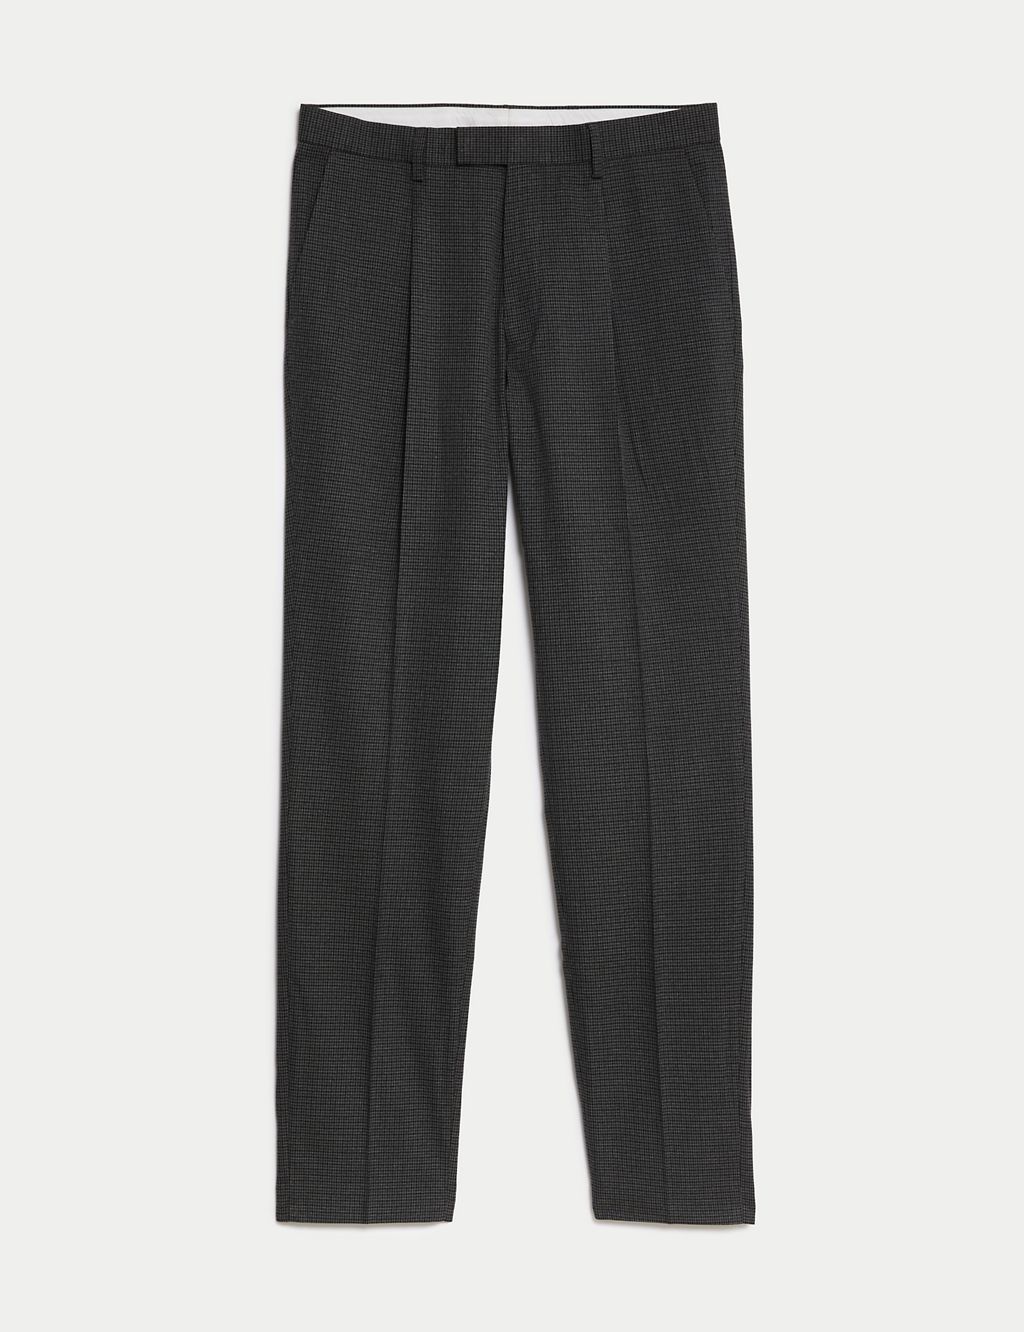 Textured Checked Stretch Trousers | M&S Collection | M&S